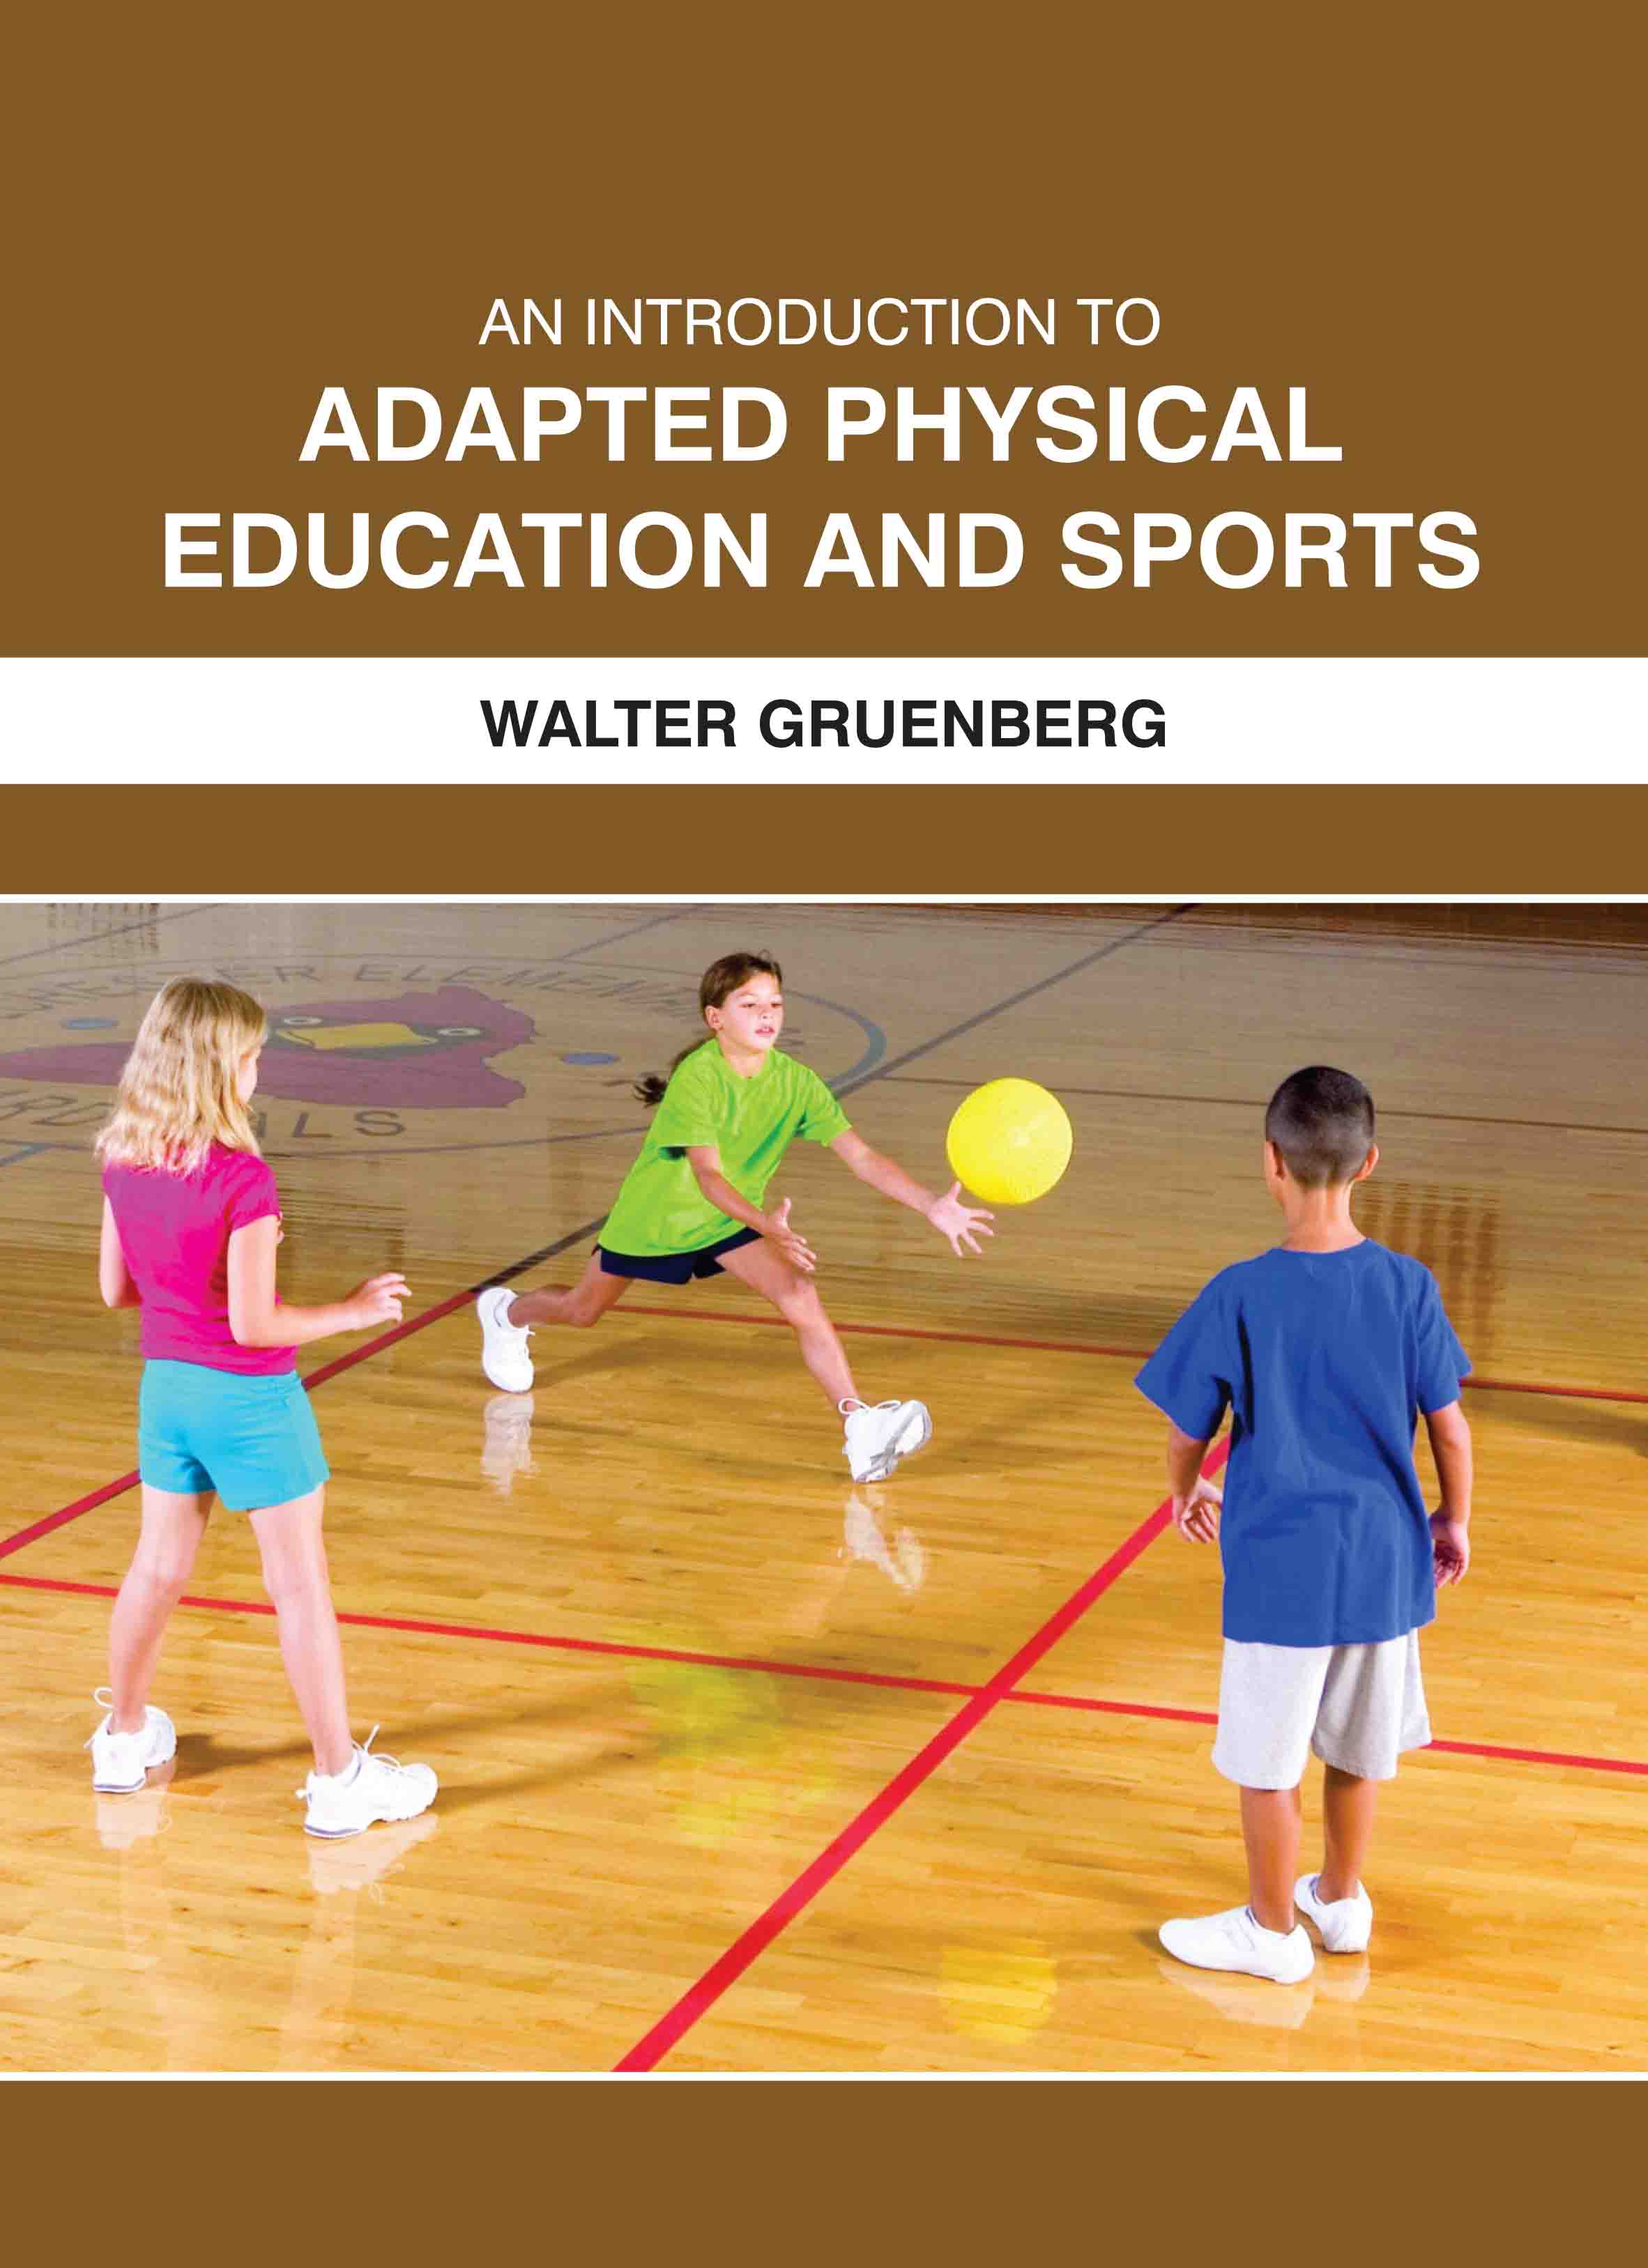 An Introduction to Adapted Physical Education and Sports